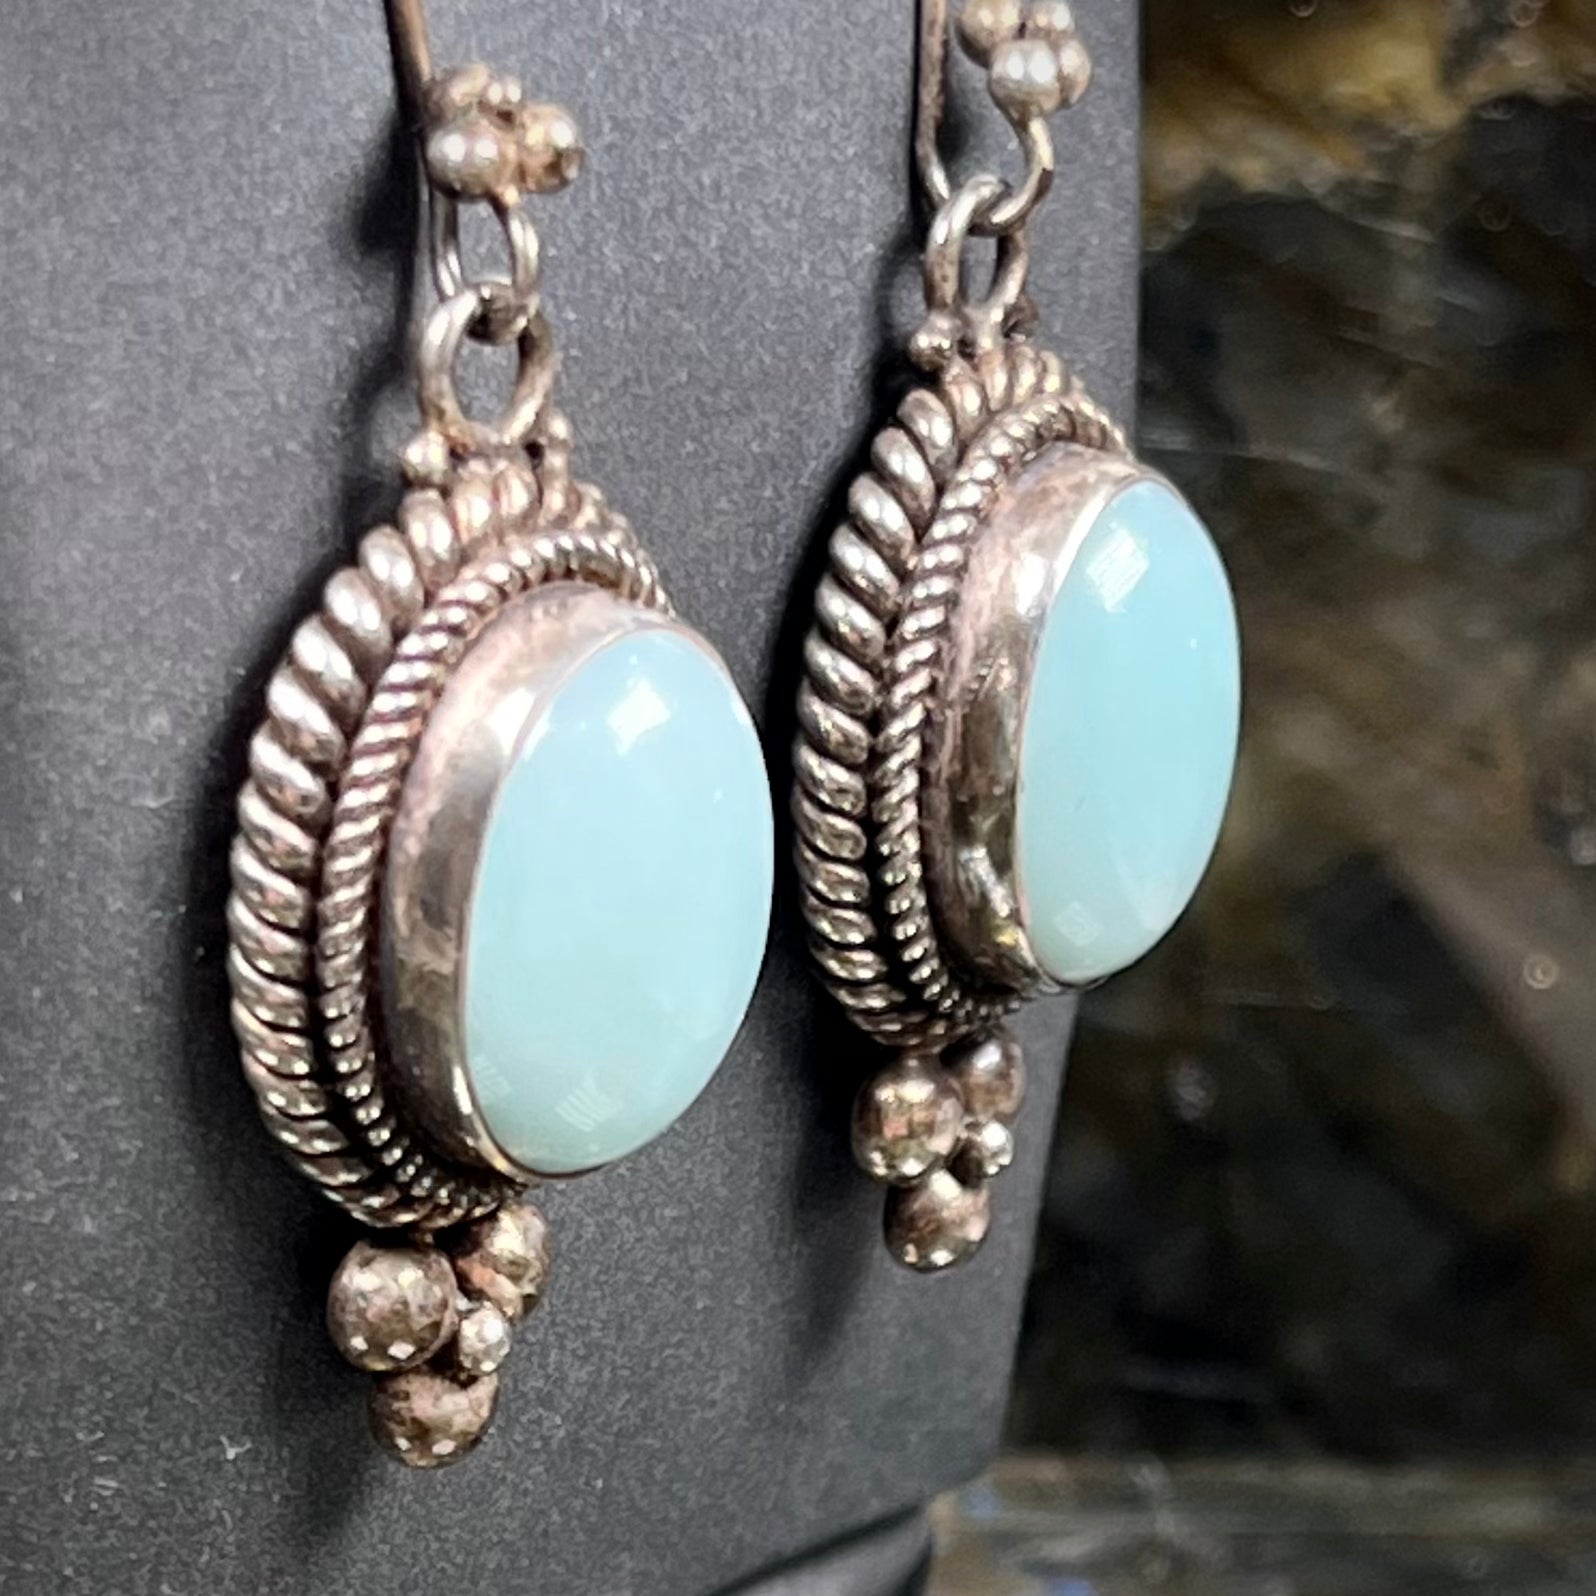 A pair of silver wire dangle earrings set with blue agate stones.  The earrings have a braided rope design.